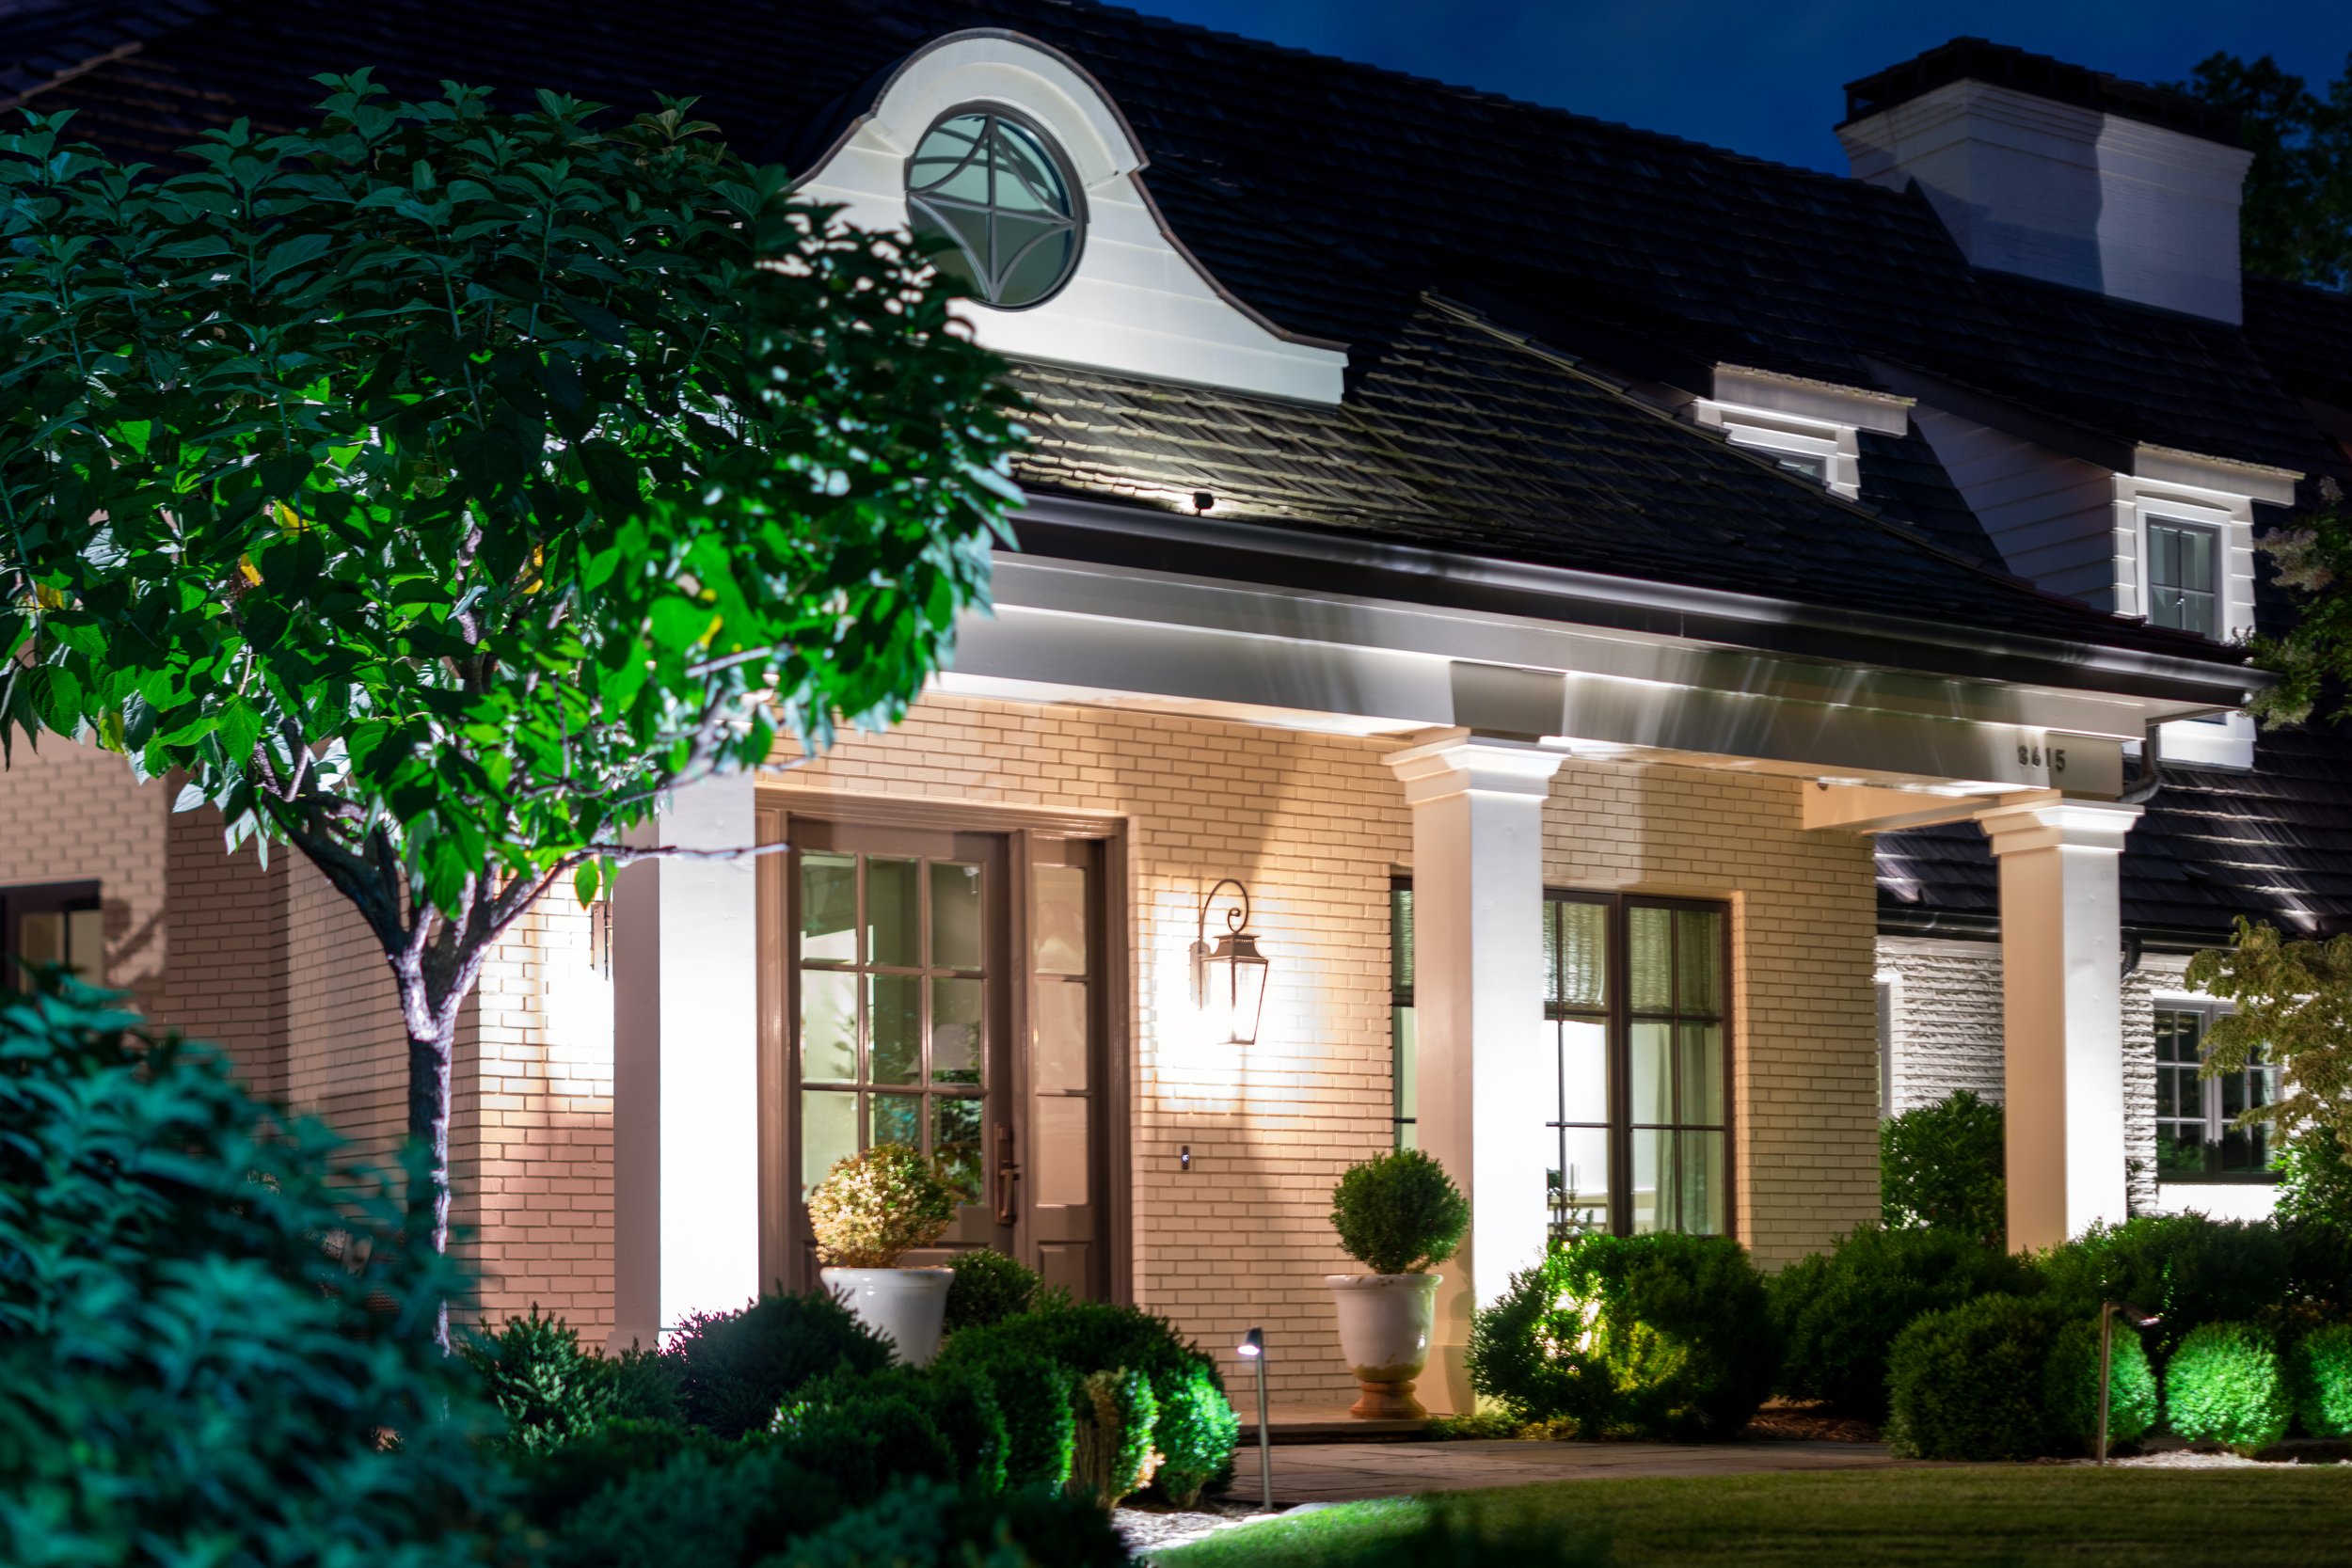  White brick home with large white columns is illuminated with a combination of architectural lighting and landscape lighting.  